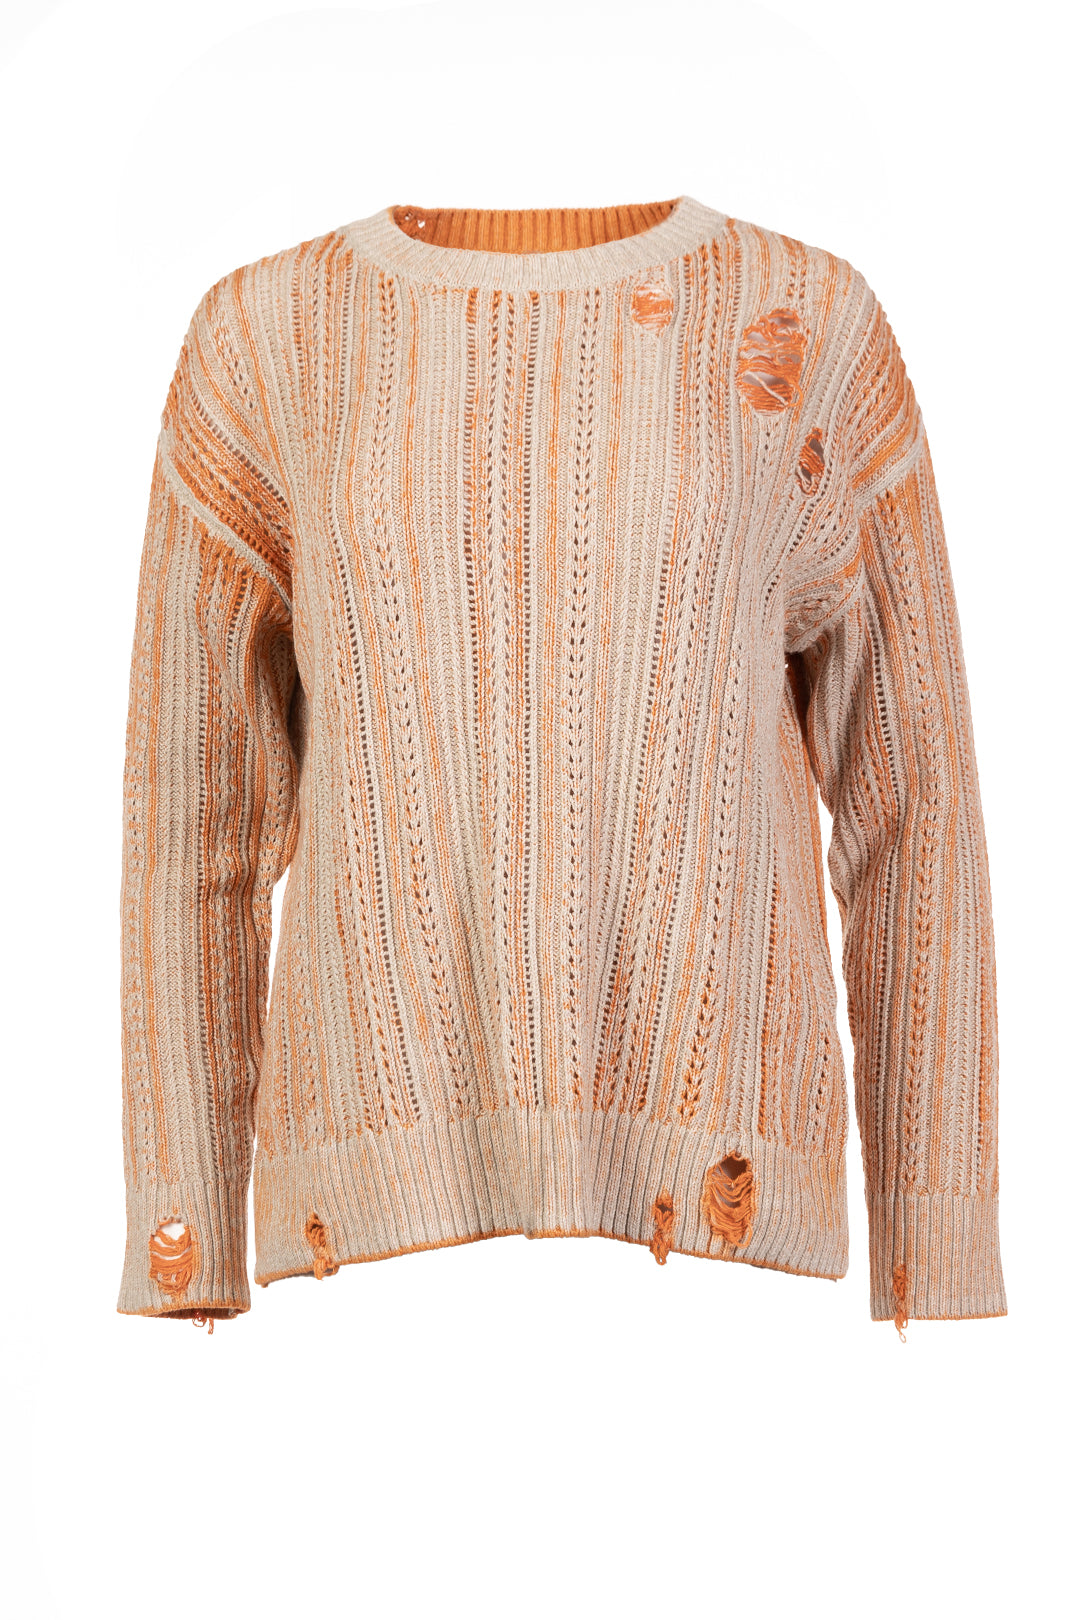 Orange sweater with long sleeves with holes | Frevo